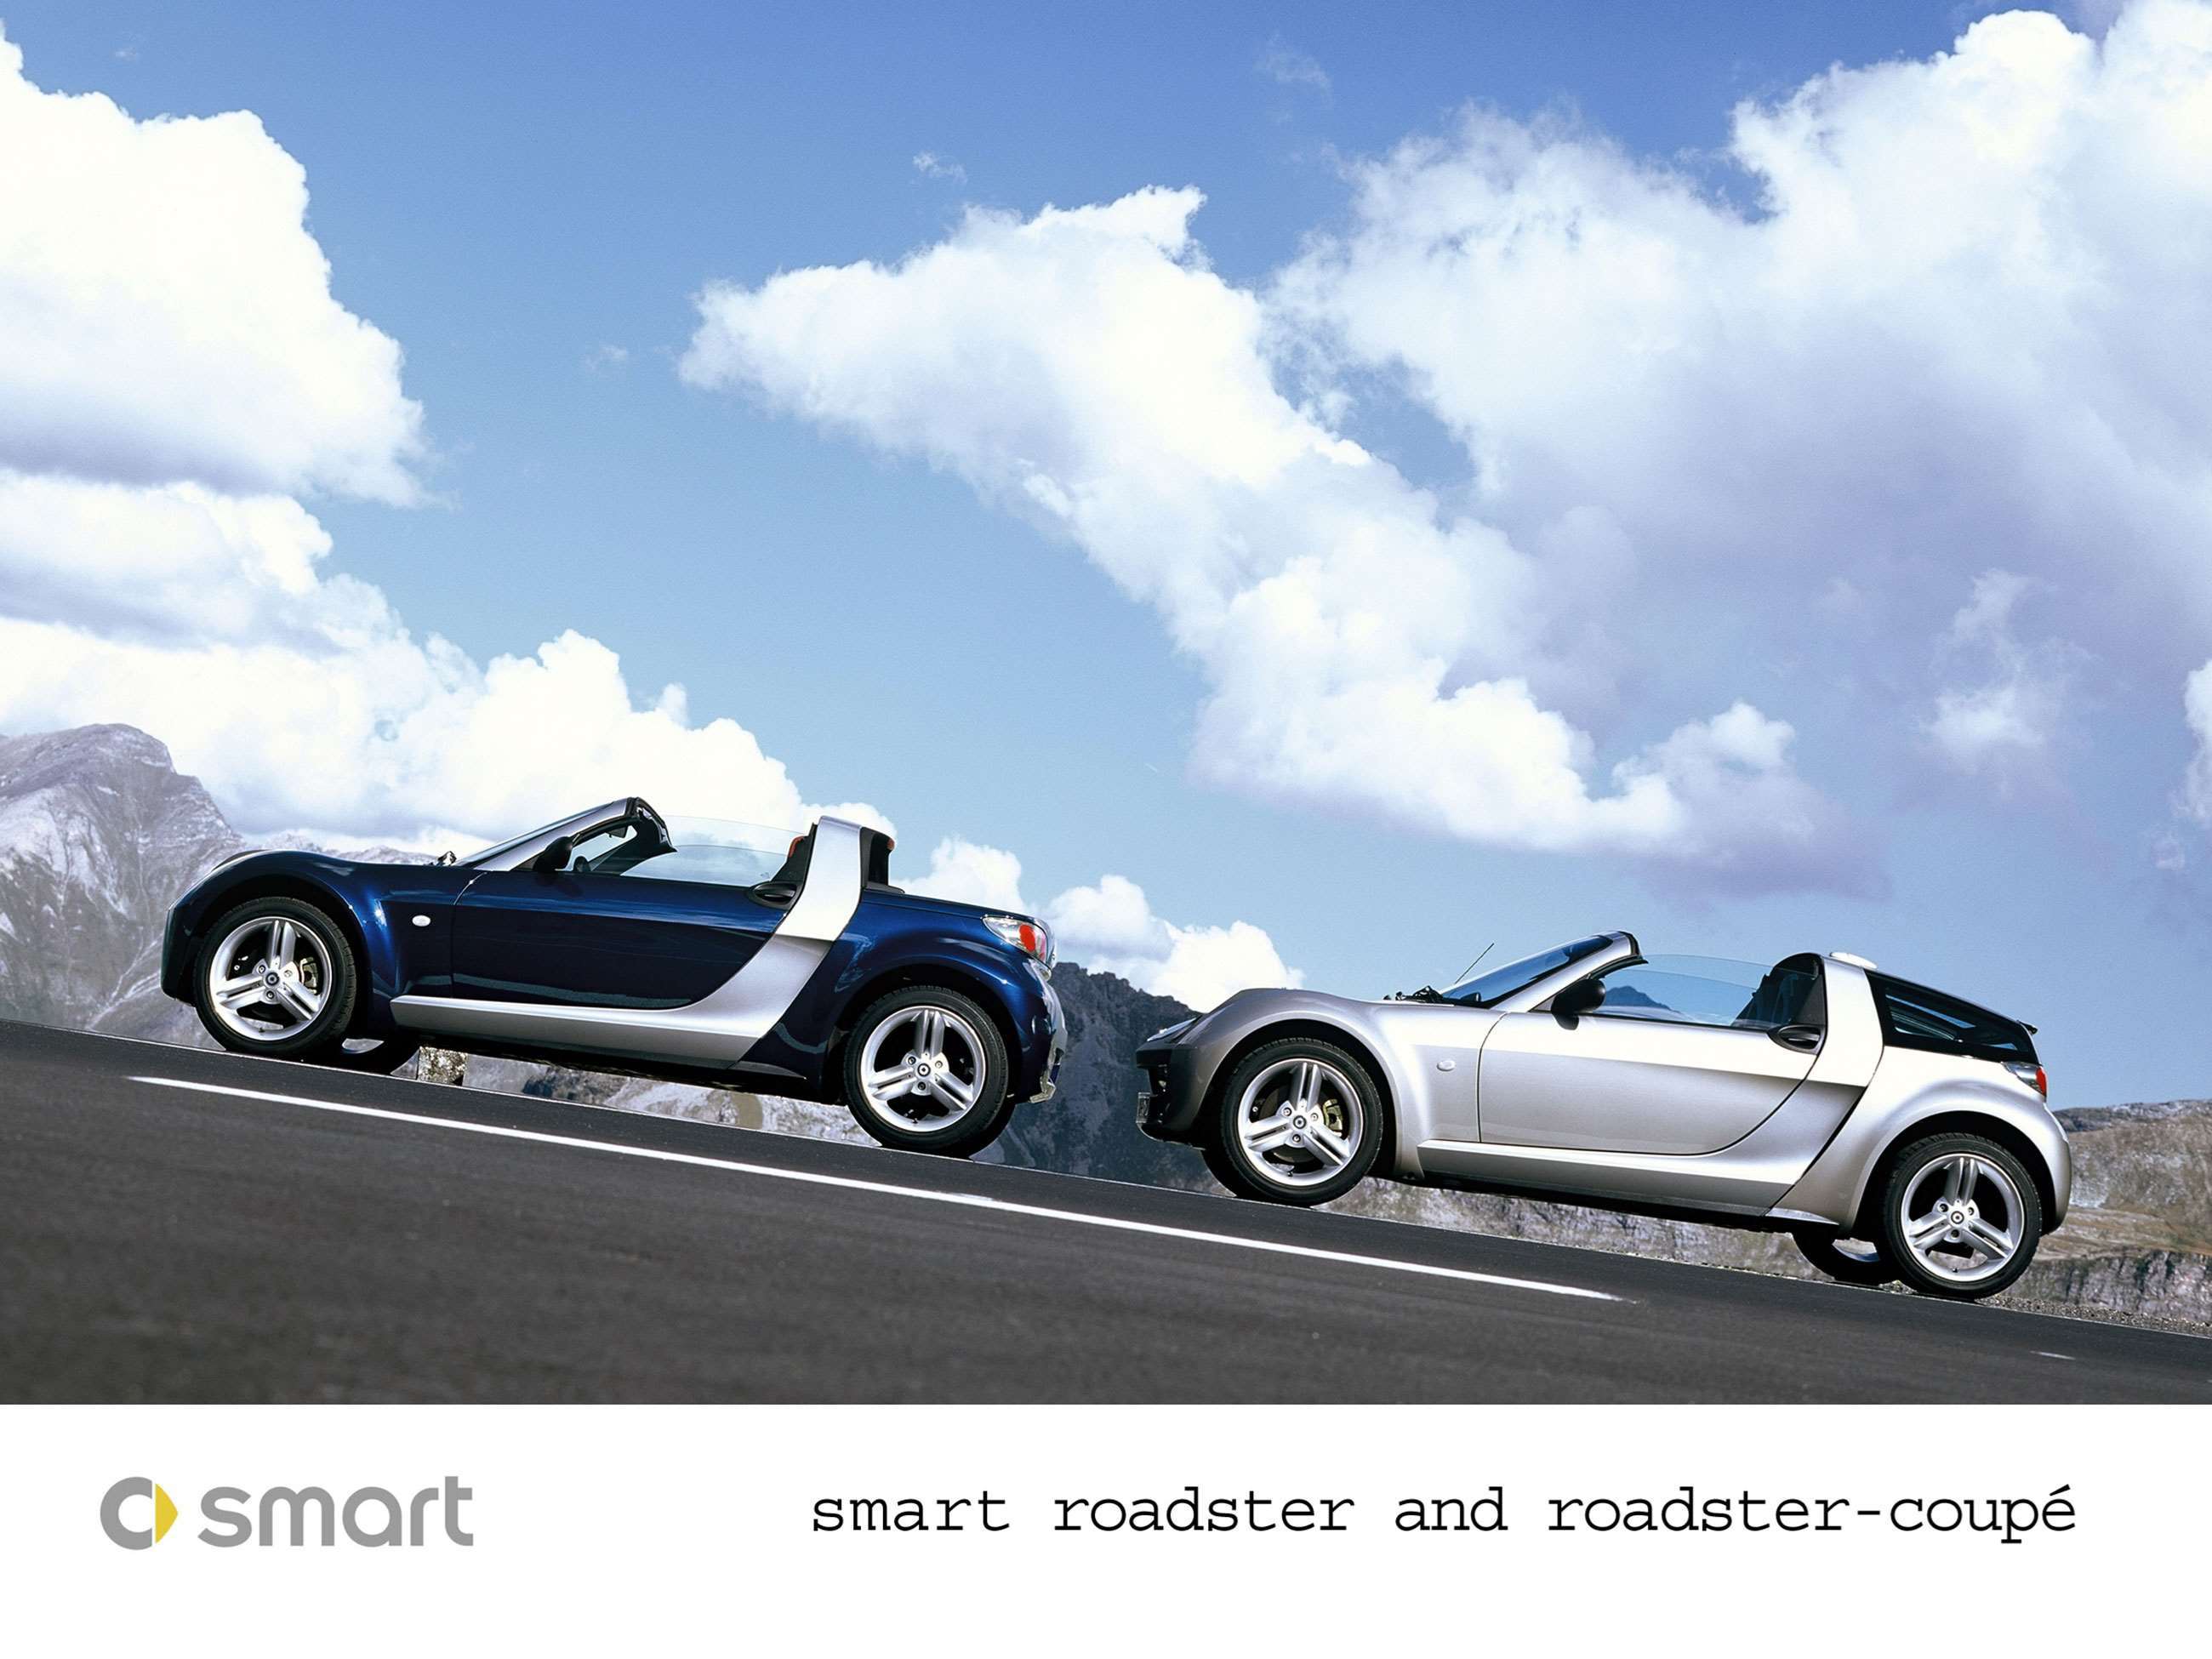 smart-roadster-buying-guide-coupe-convertible-12012022.jpg